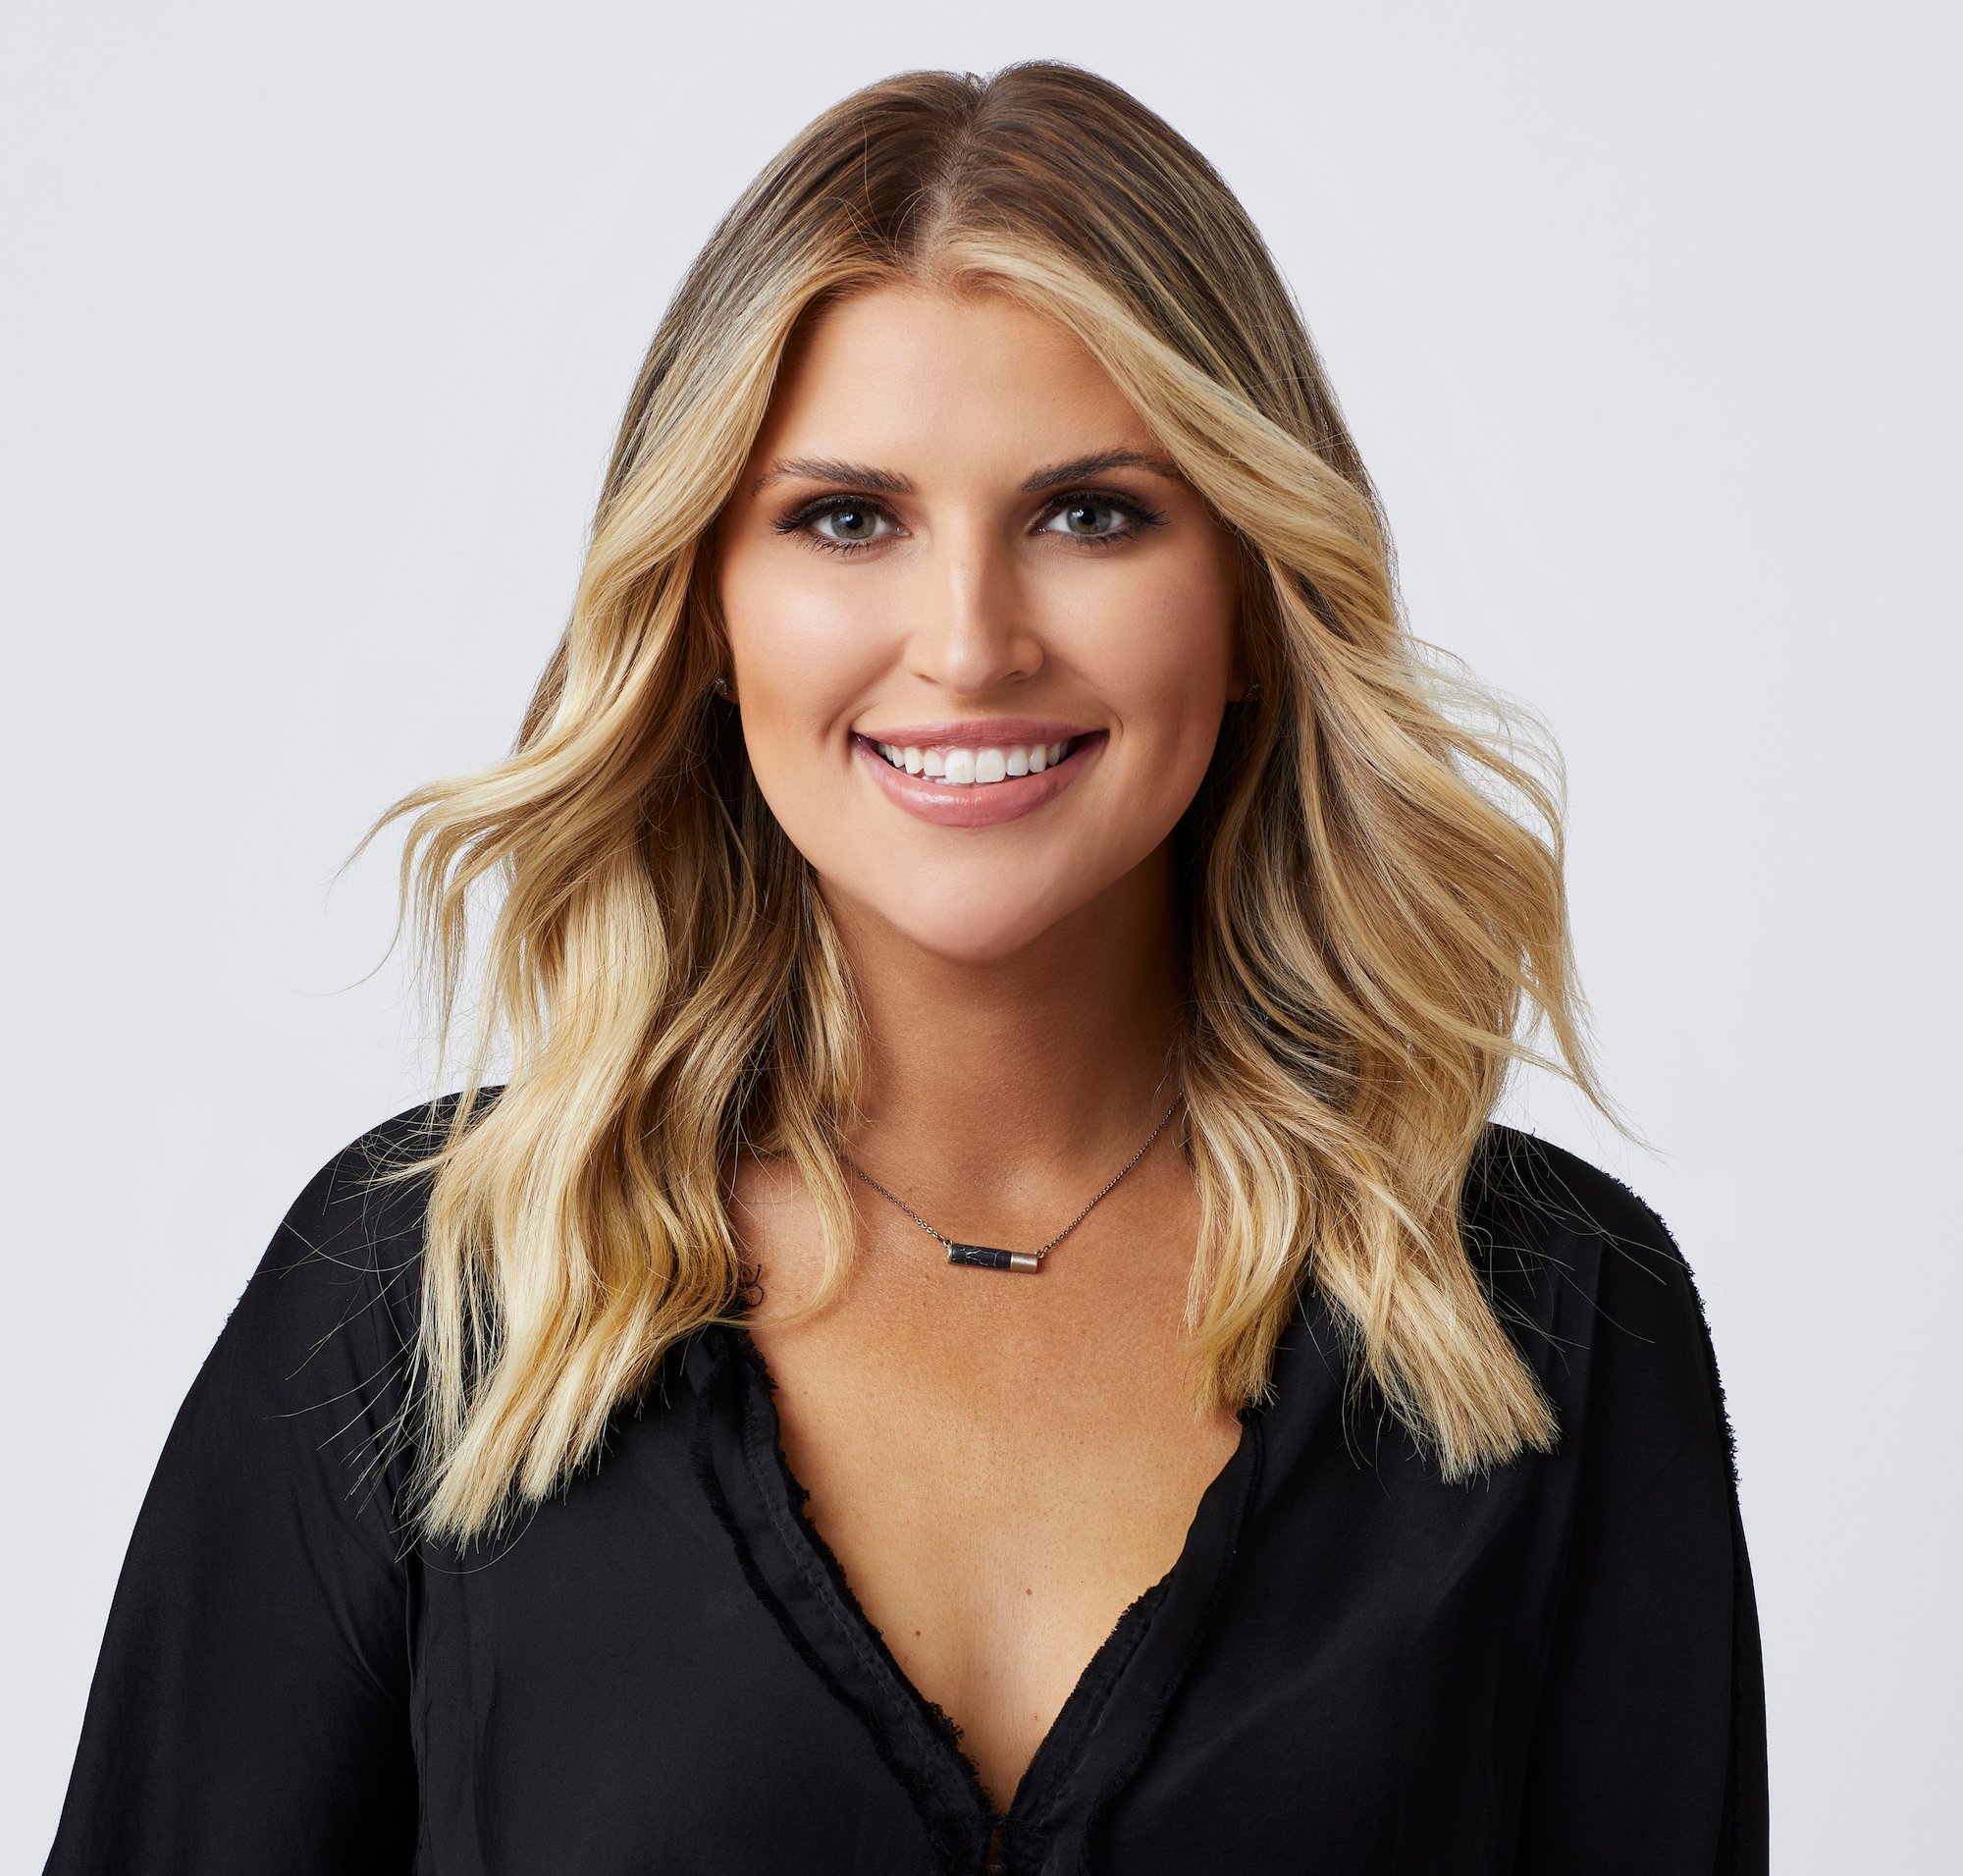 'The Bachelor' 2022 contestant Claire Heilig in a black shirt in a promotional image for the show